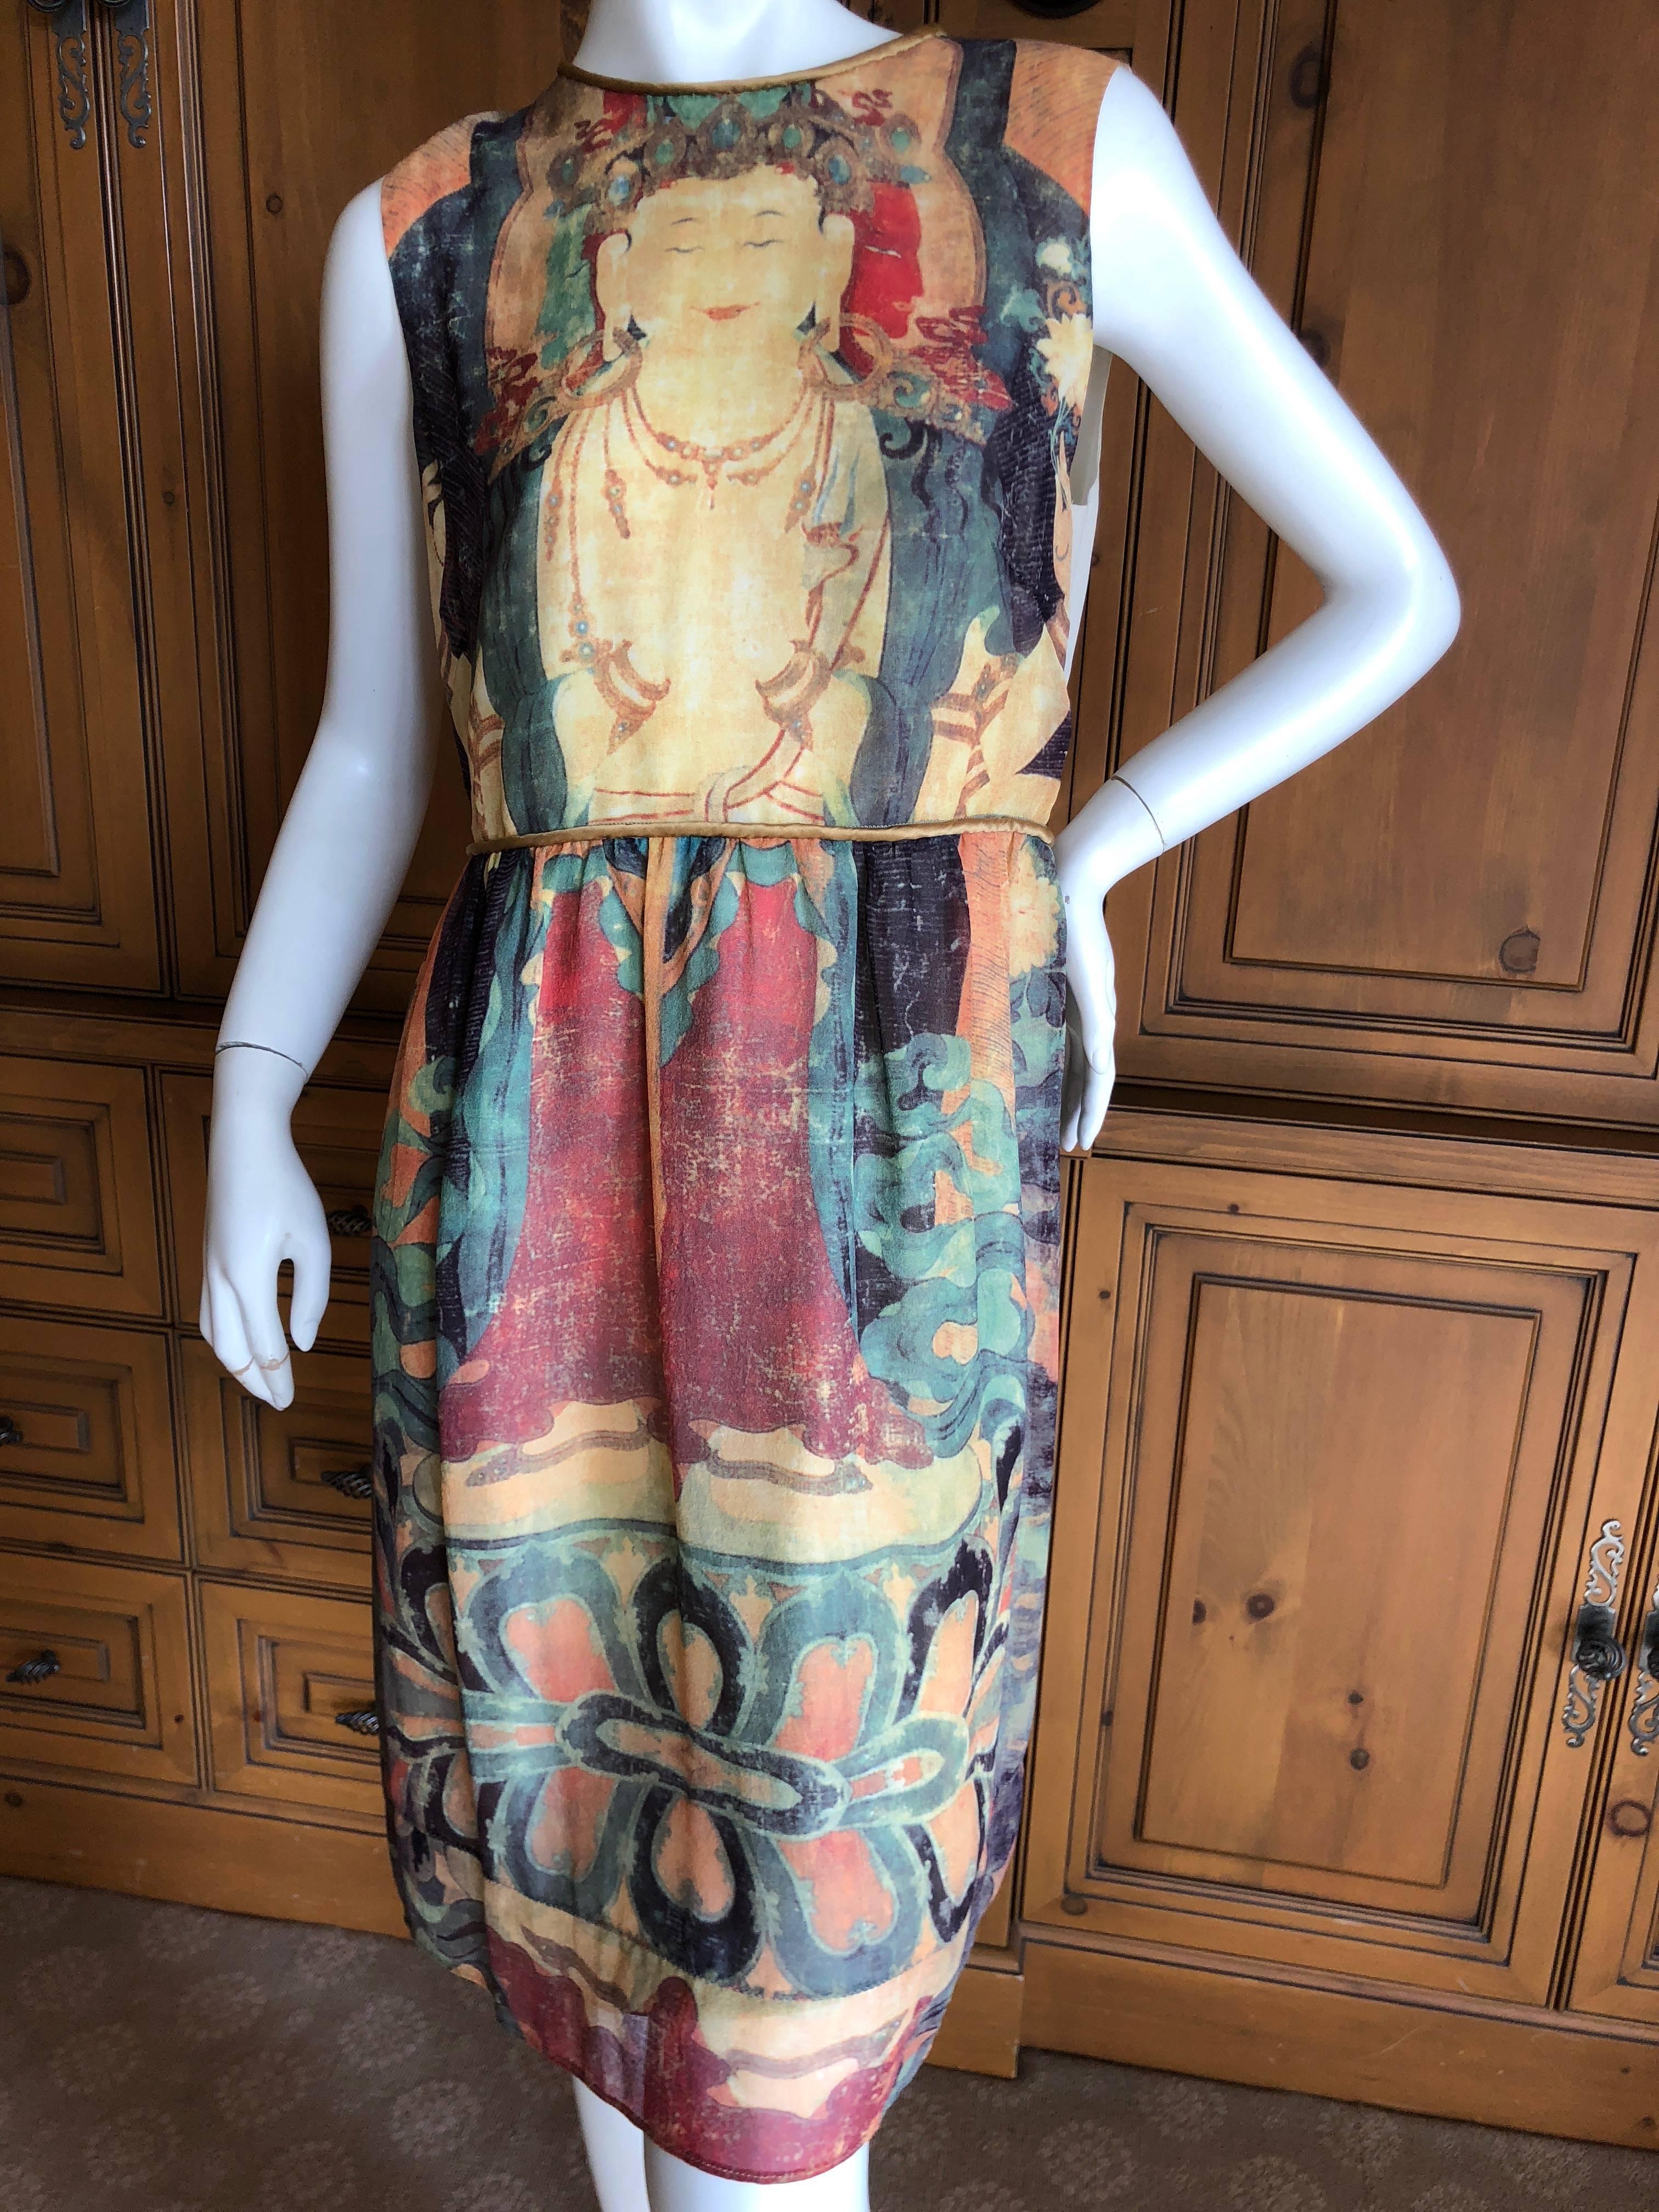 Vivienne Tam Vintage Buddha Dress
This is such a charming piece, with beautiful Cloisonné beads on the straps


Bust  38